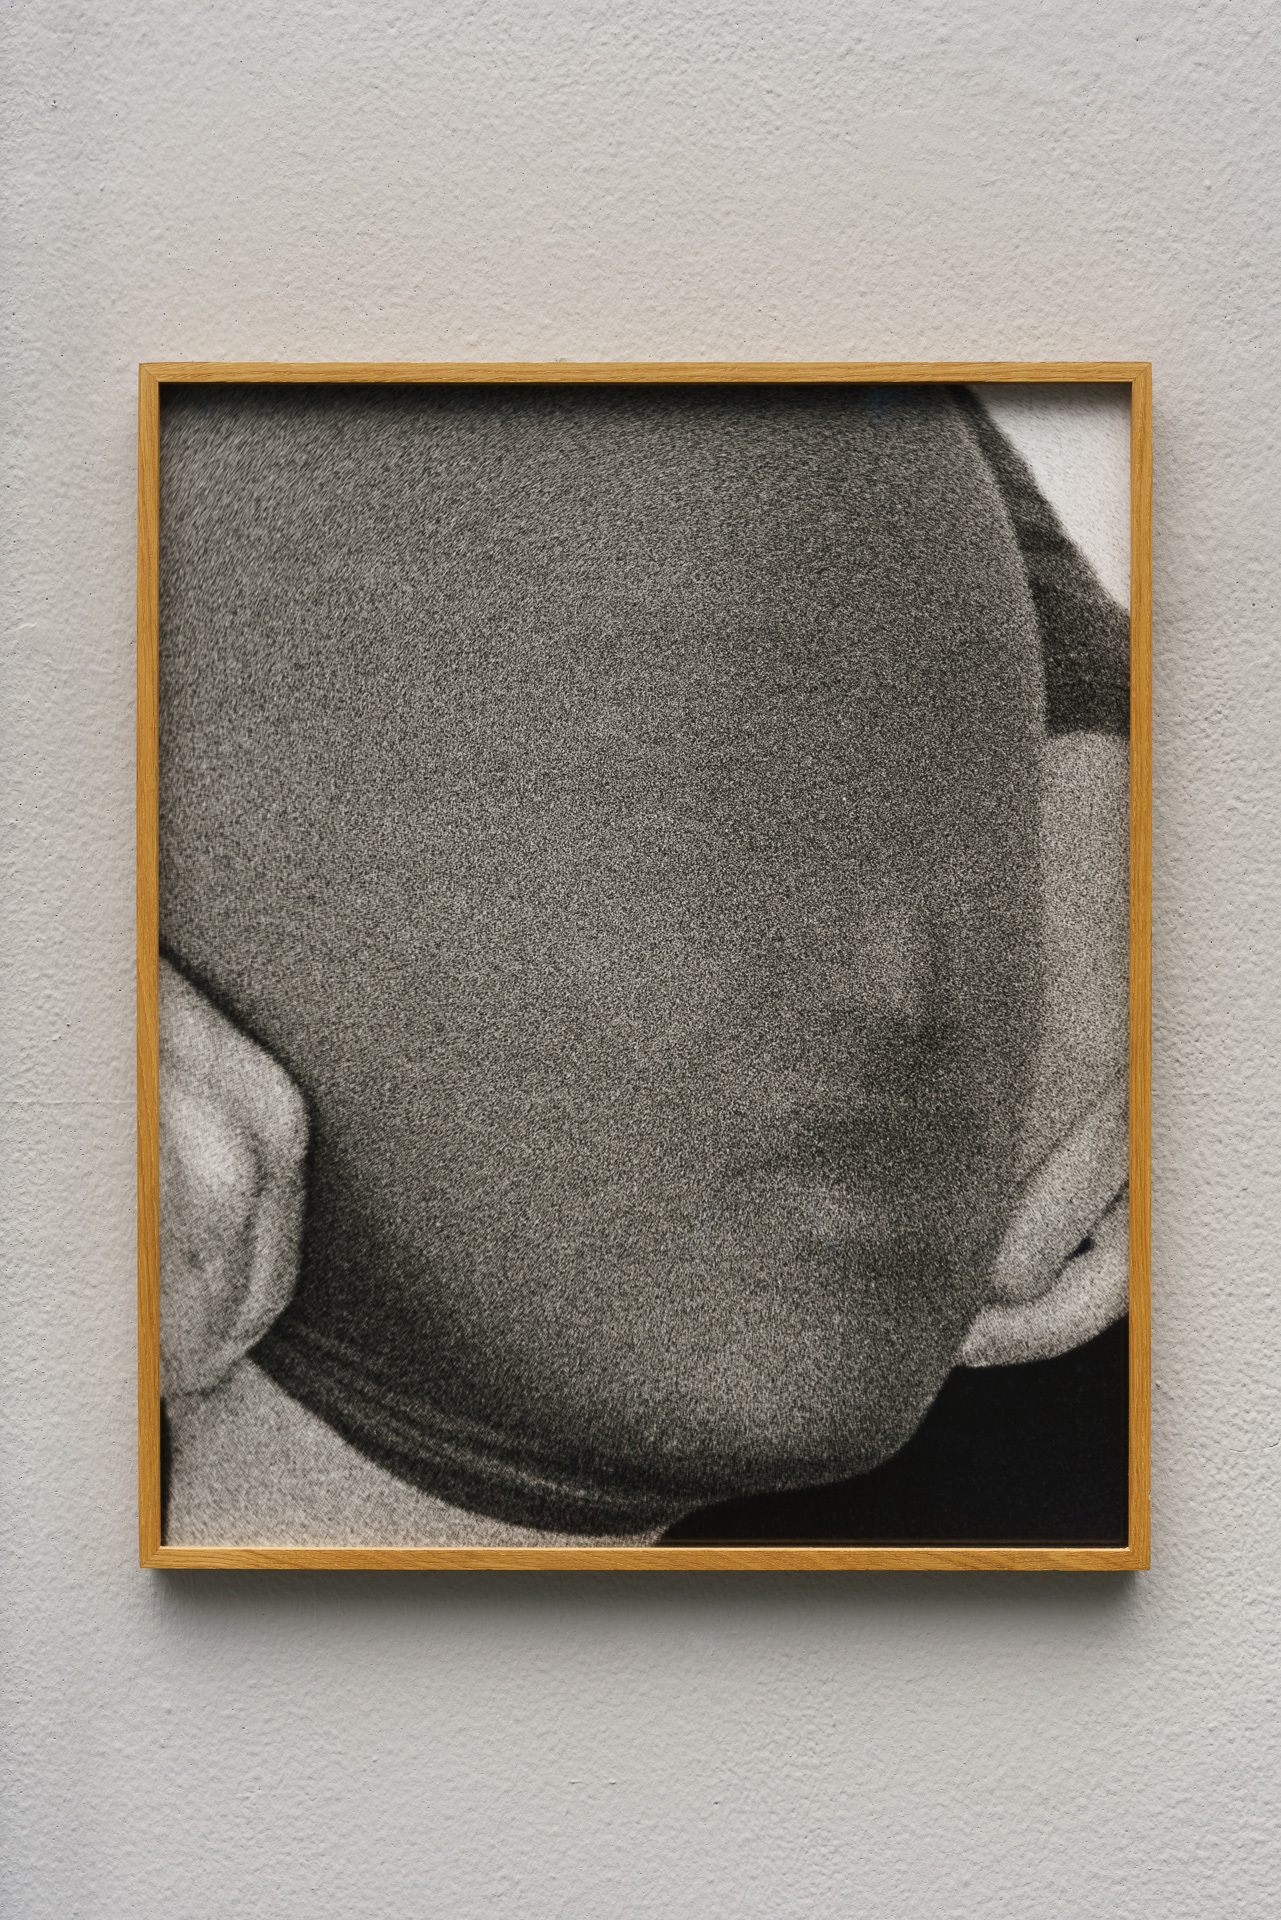 Joanna Piotrowska, Father, II, 2022, Silver gelatine print, printed in 2022, 60×50×2.5cm. Photo: Jana Buch, Courtesy of the artist and Neue Galerie Gladbeck. Curated by Luisa Schlotterbeck